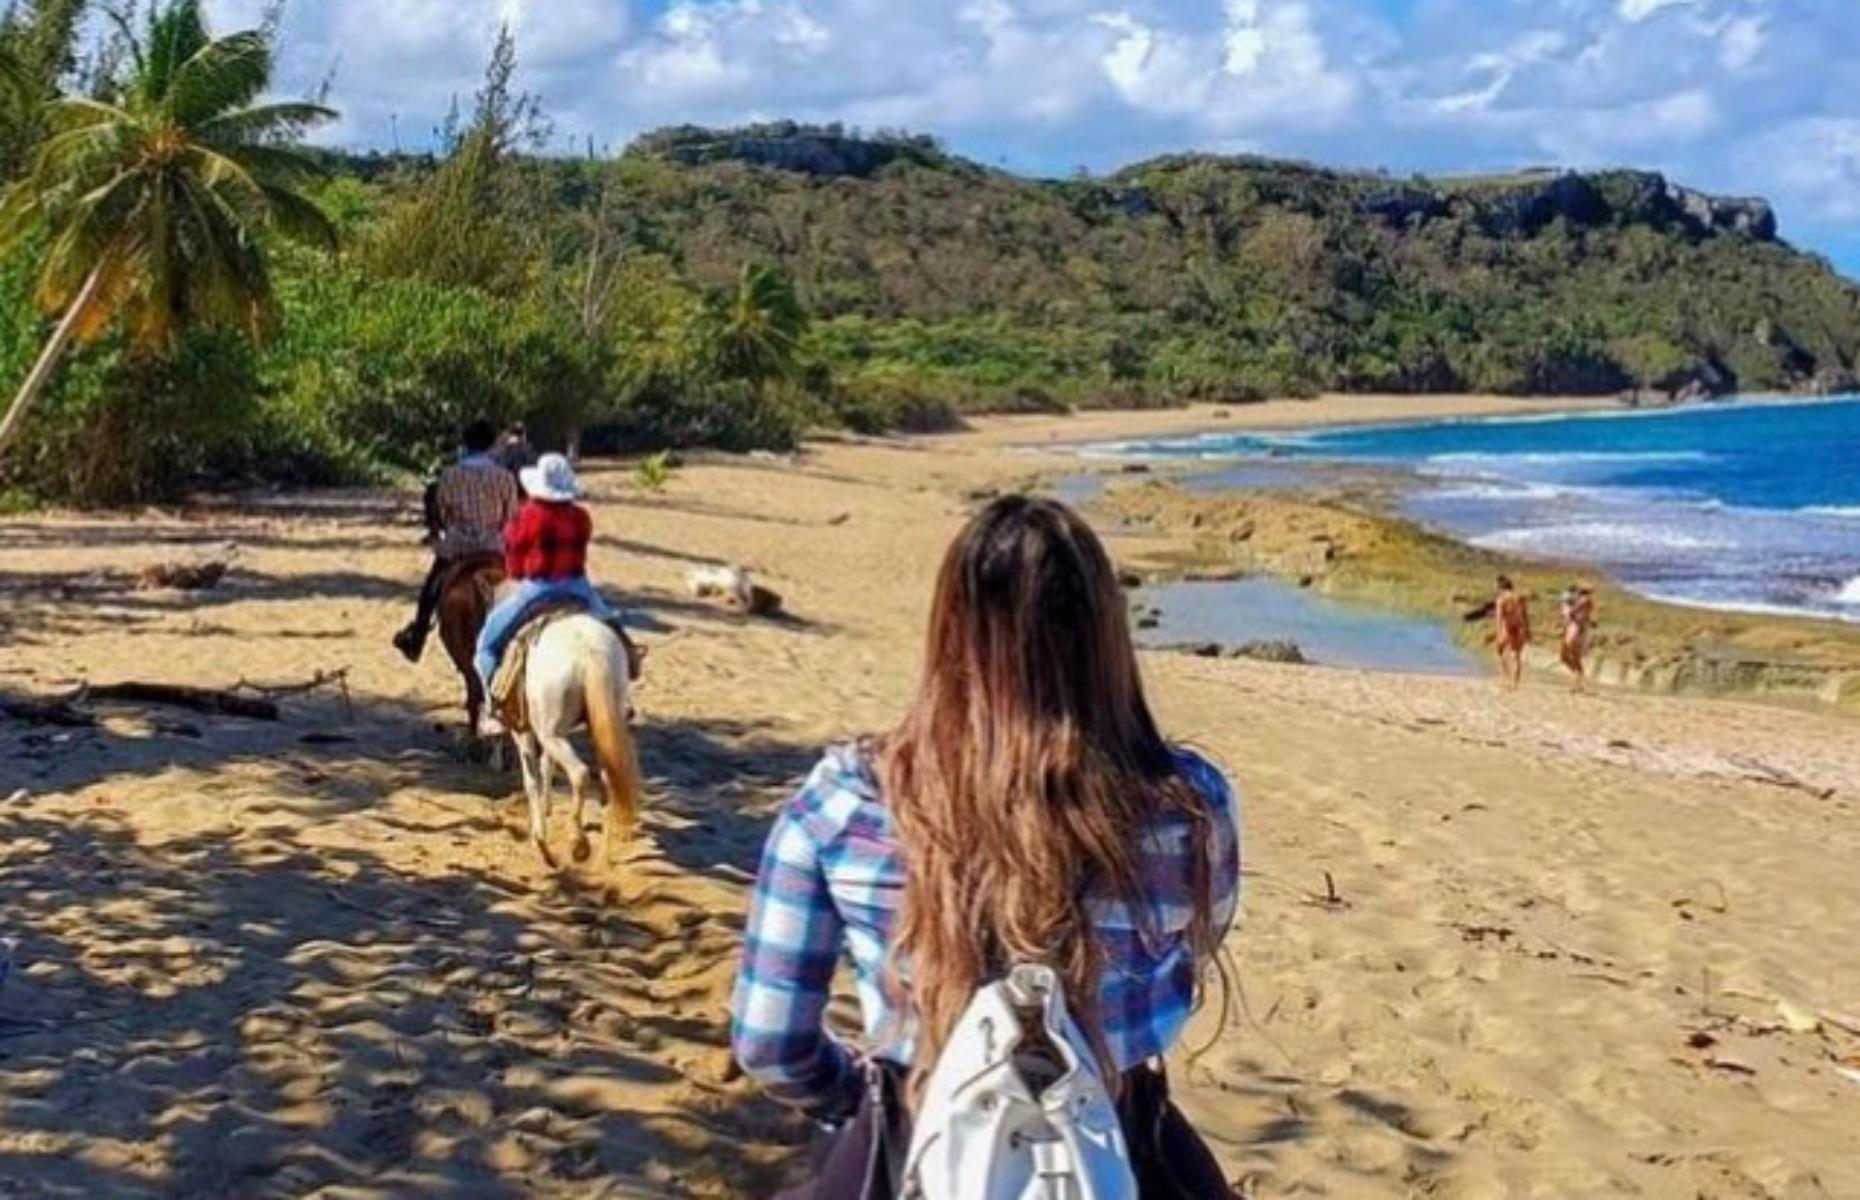 <p>The dream of horse riding along a windswept beach is a reality in Puerto Rico. Join a two-hour tour with <a href="https://tropicaltrailrides.com/">Tropical Trail Rides</a> and you’ll weave through a shady almond-tree forest, before riding along the sweeping sands of Survival Beach on the northwest coast, near Isabela. Owners Craig and Michelle Barker hail from California, came to Puerto Rico for a visit and never went home. As the sun sinks over the ocean, you’ll be tempted to stay too. </p>